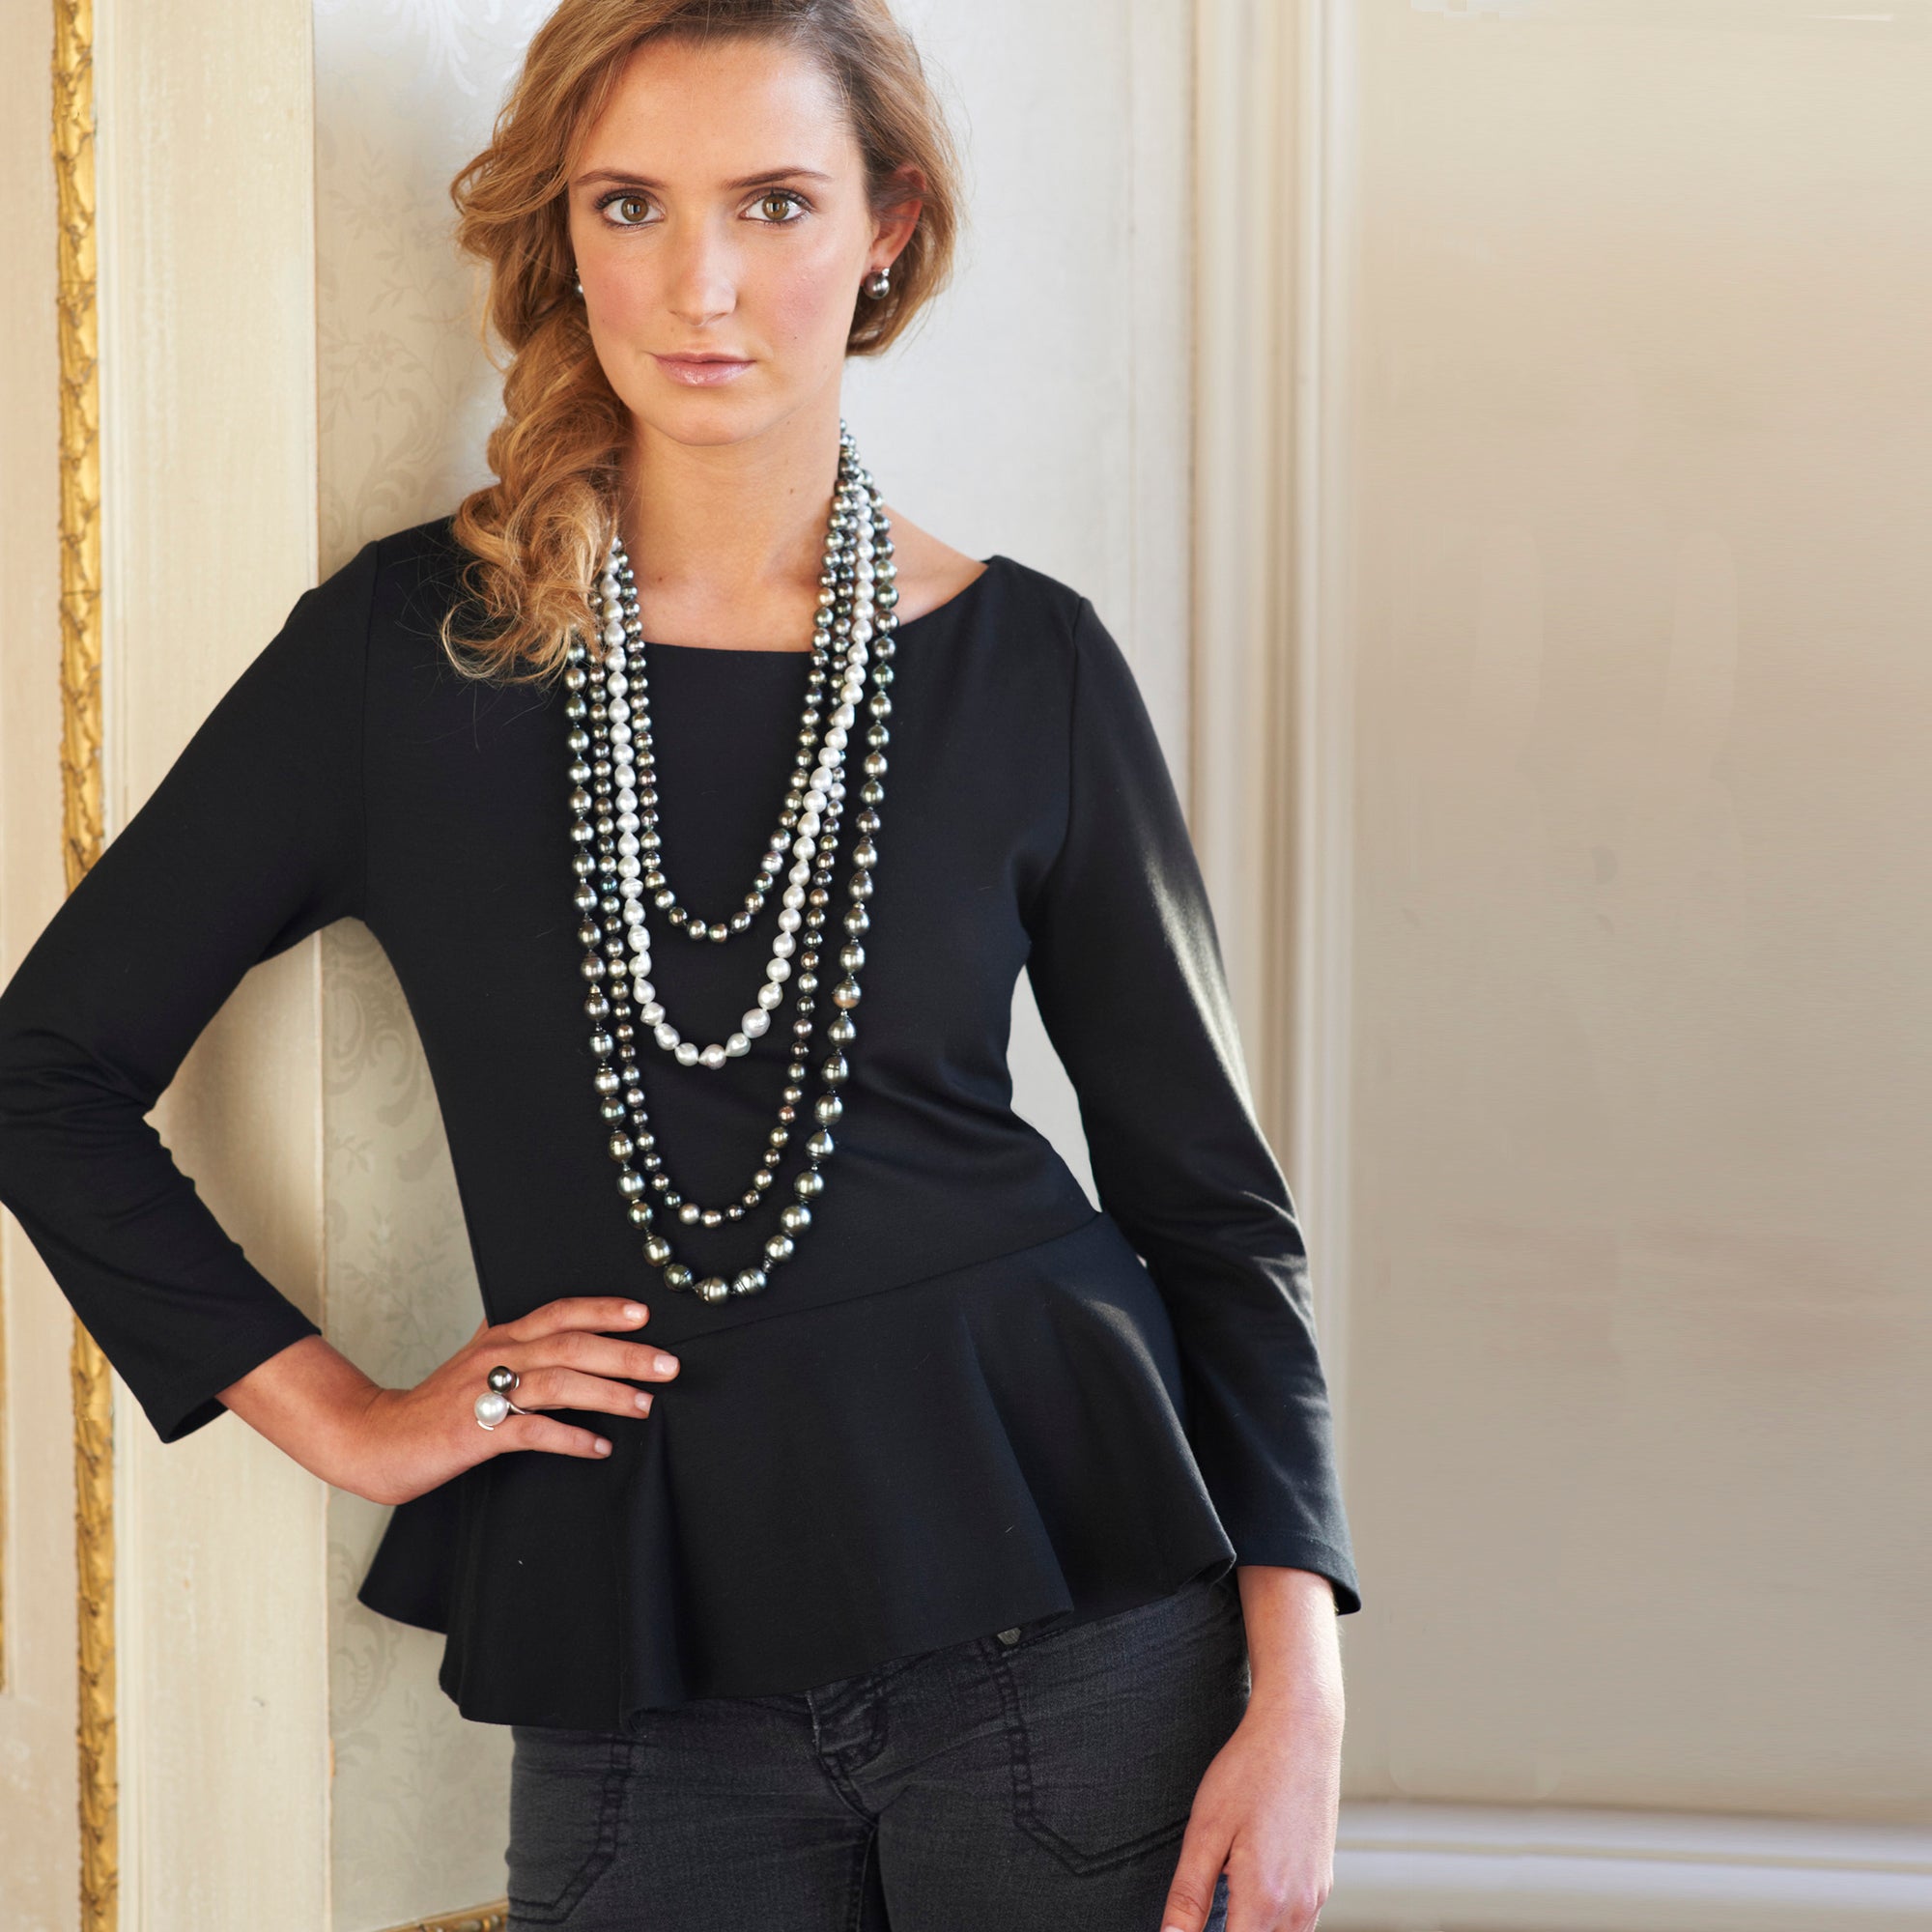 8 Ways to Style White Pearls Without Looking Old-Fashioned